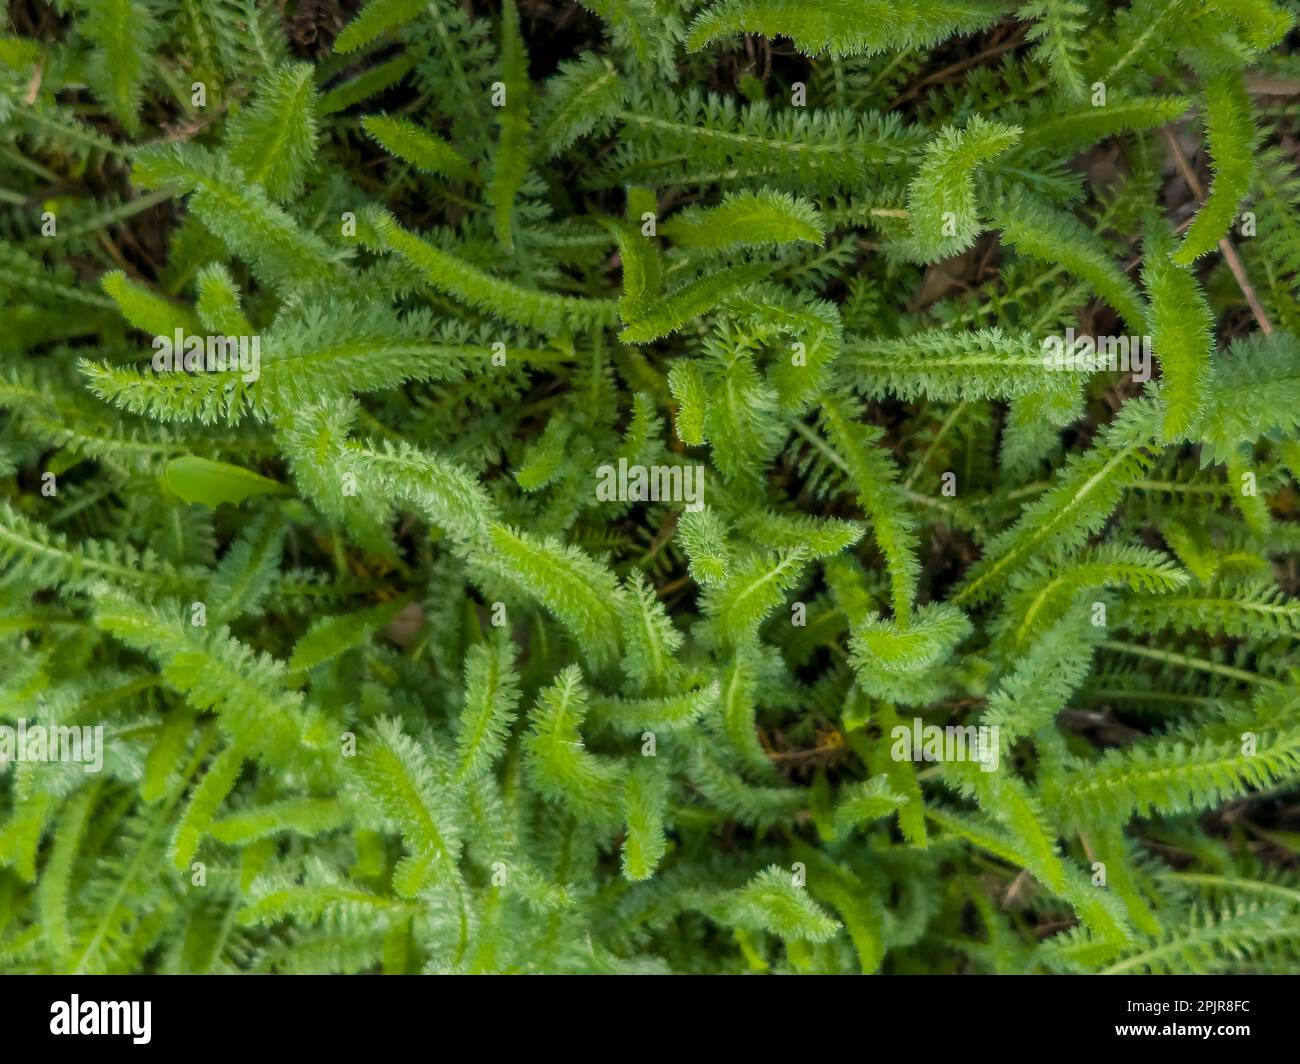 Young green leaves of yarrow on the background of old dry grass in the spring. The Latin name is Achillea millefolium L. Stock Photo